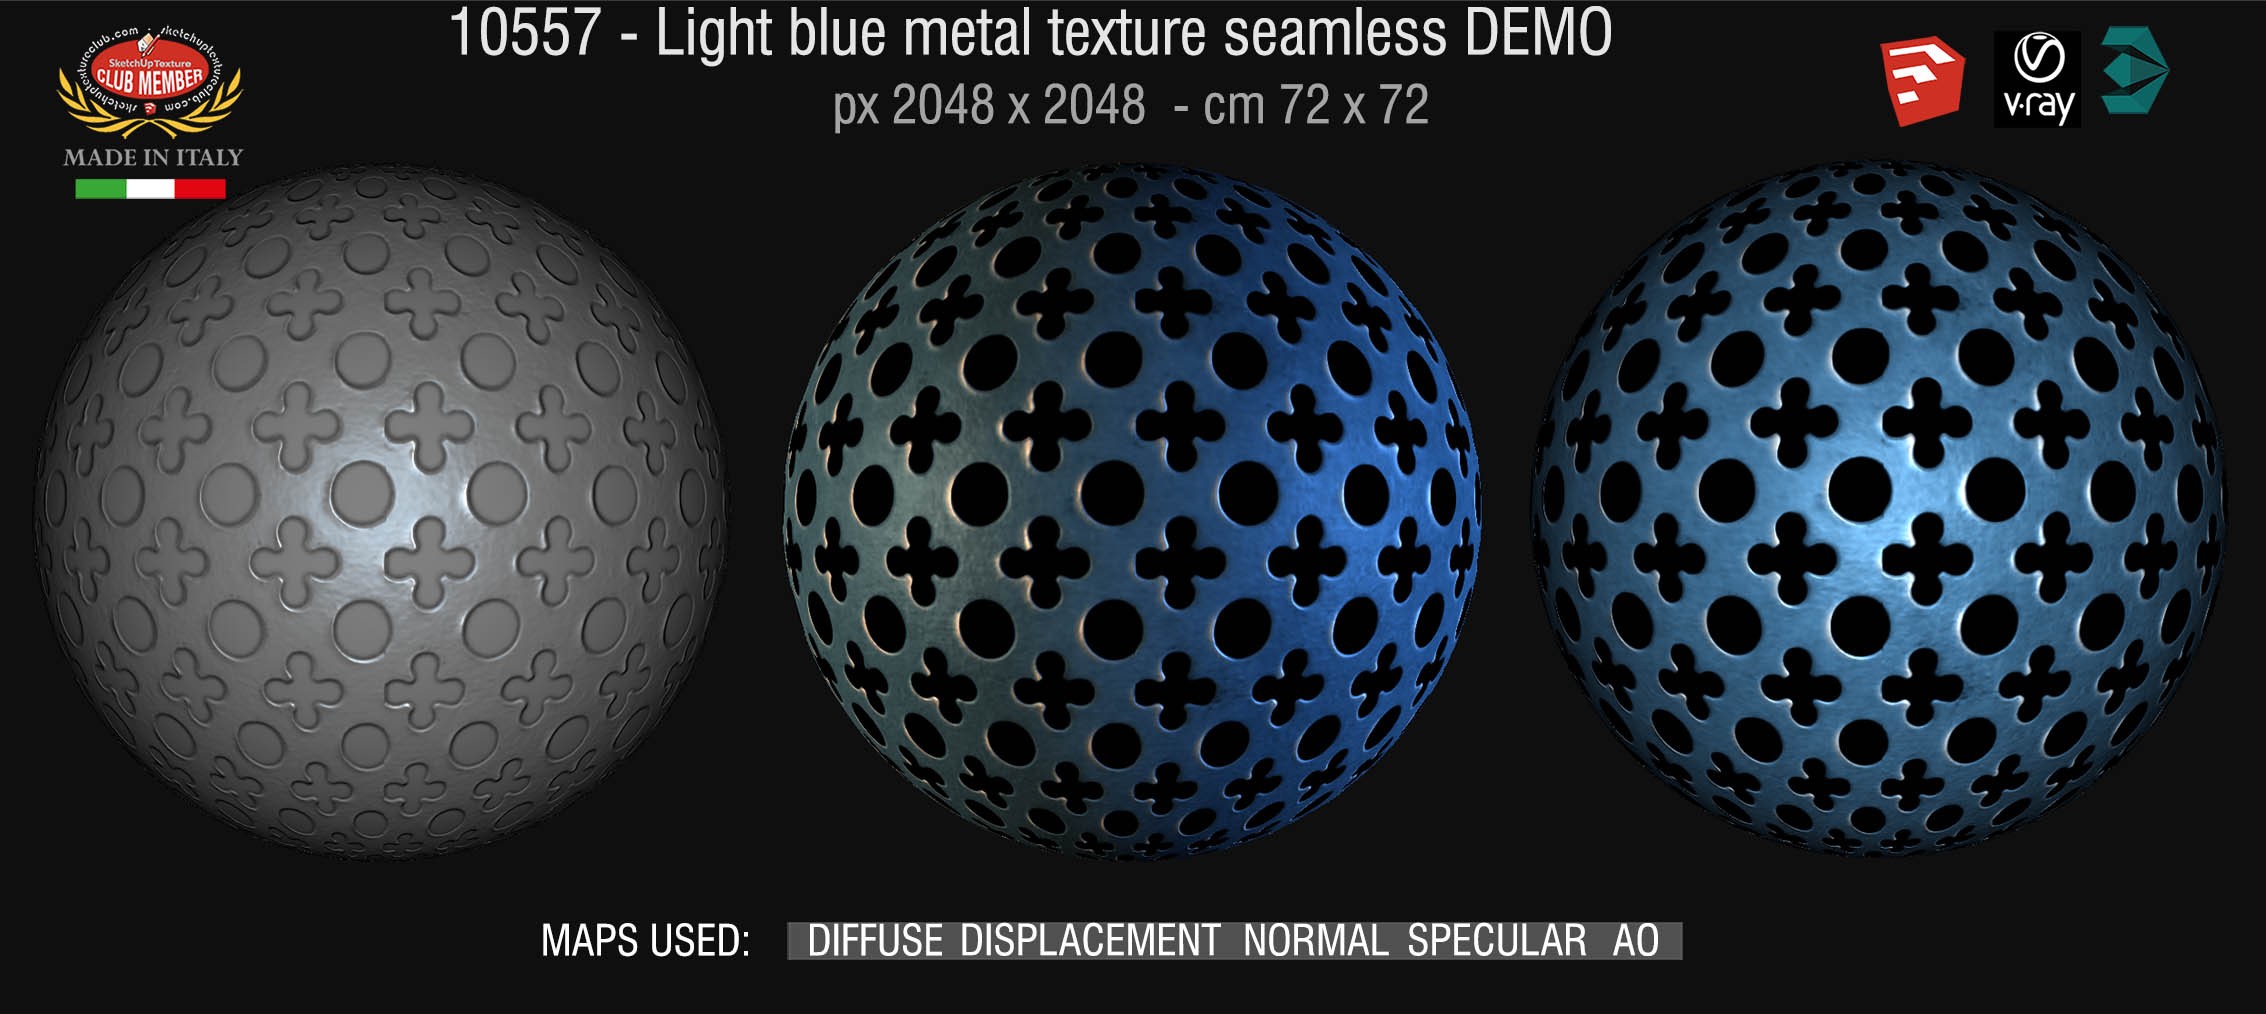 10557 HR Light blue perforated metal texture seamless + maps DEMO